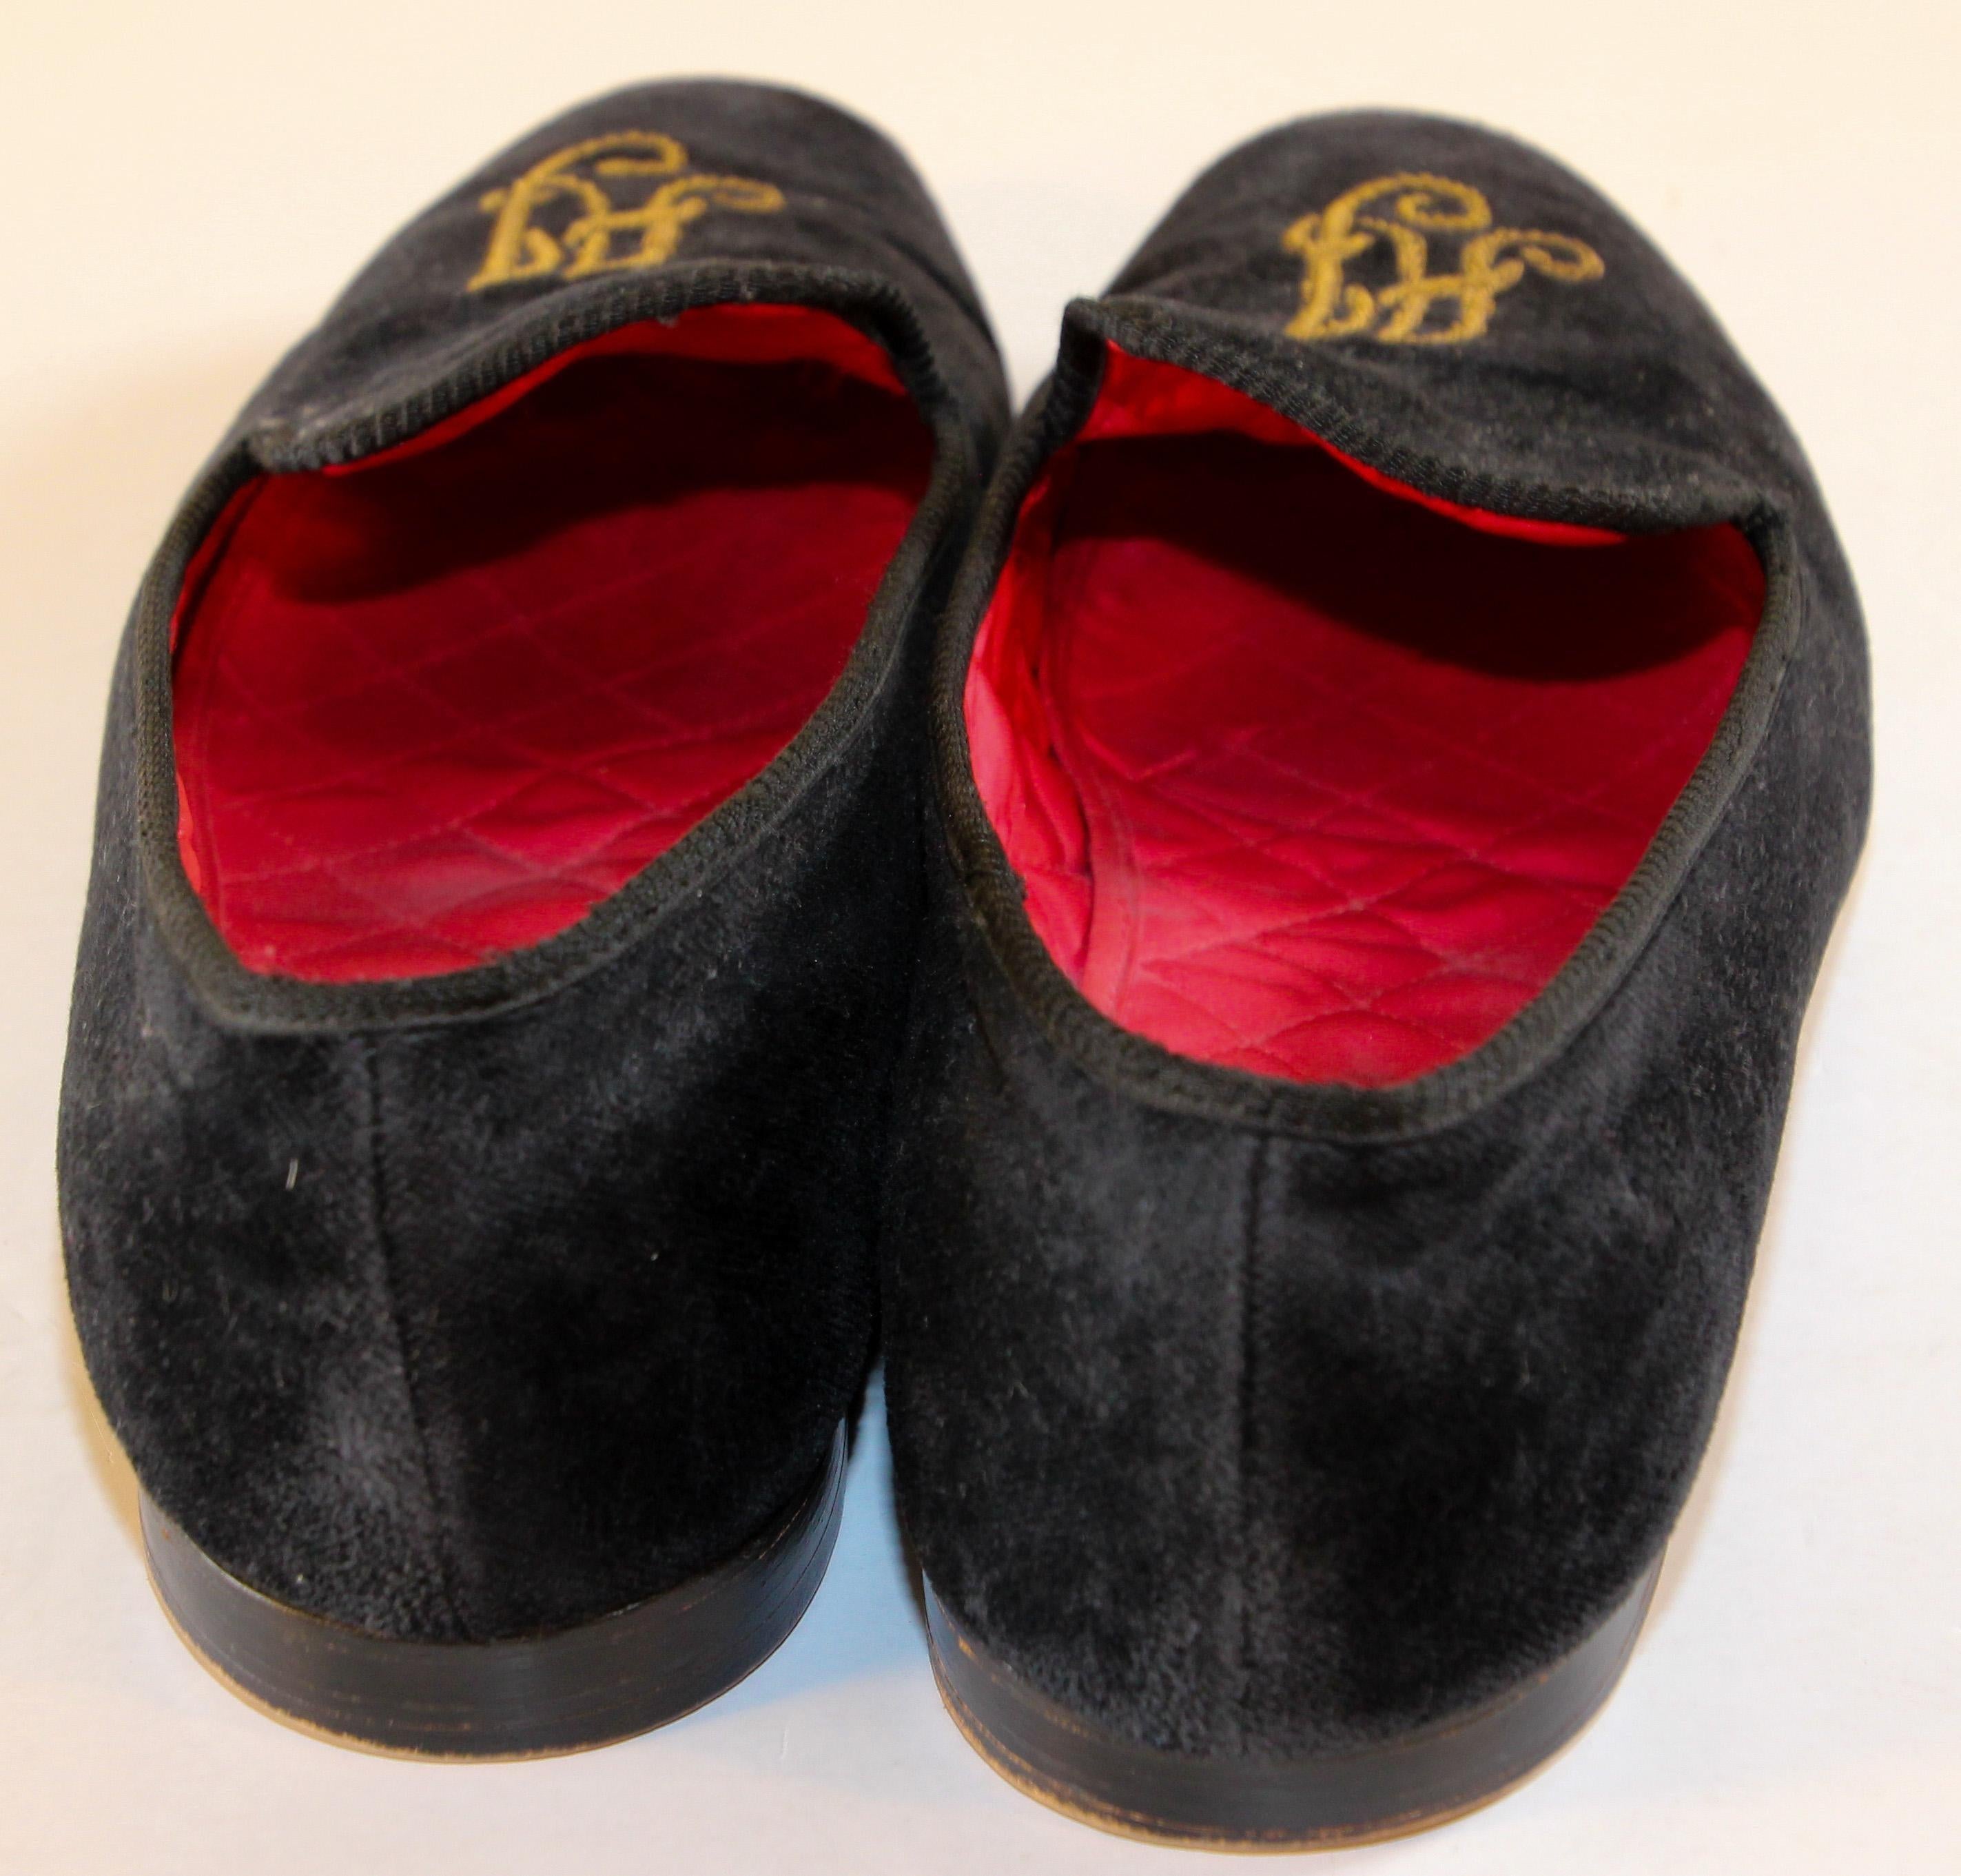 Brown Handmade Men's Black Velvet Loafers with Gold Embroidery